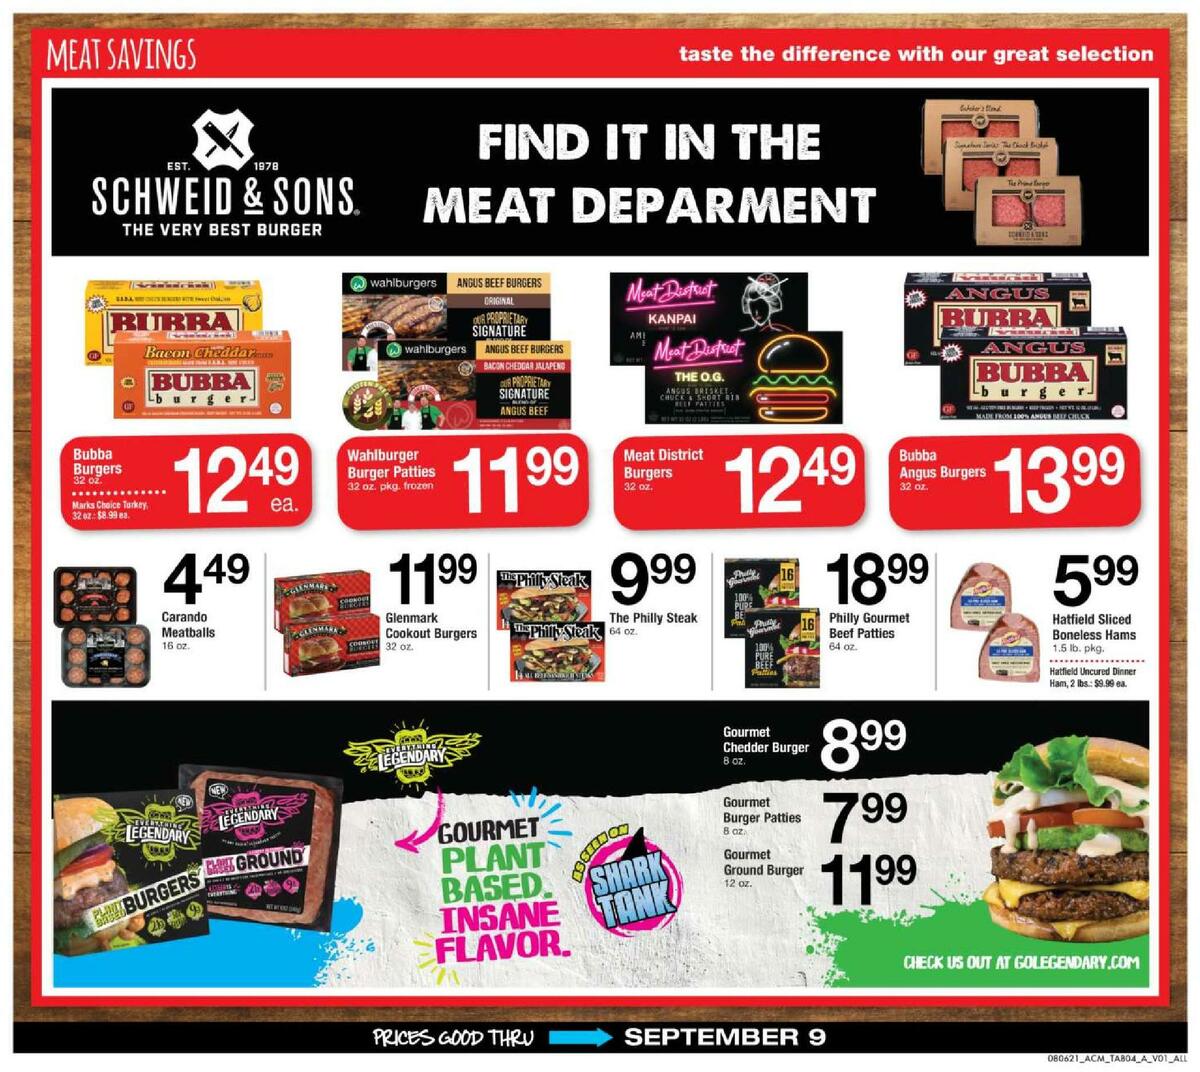 ACME Markets Big Book of Savings Weekly Ad from August 6